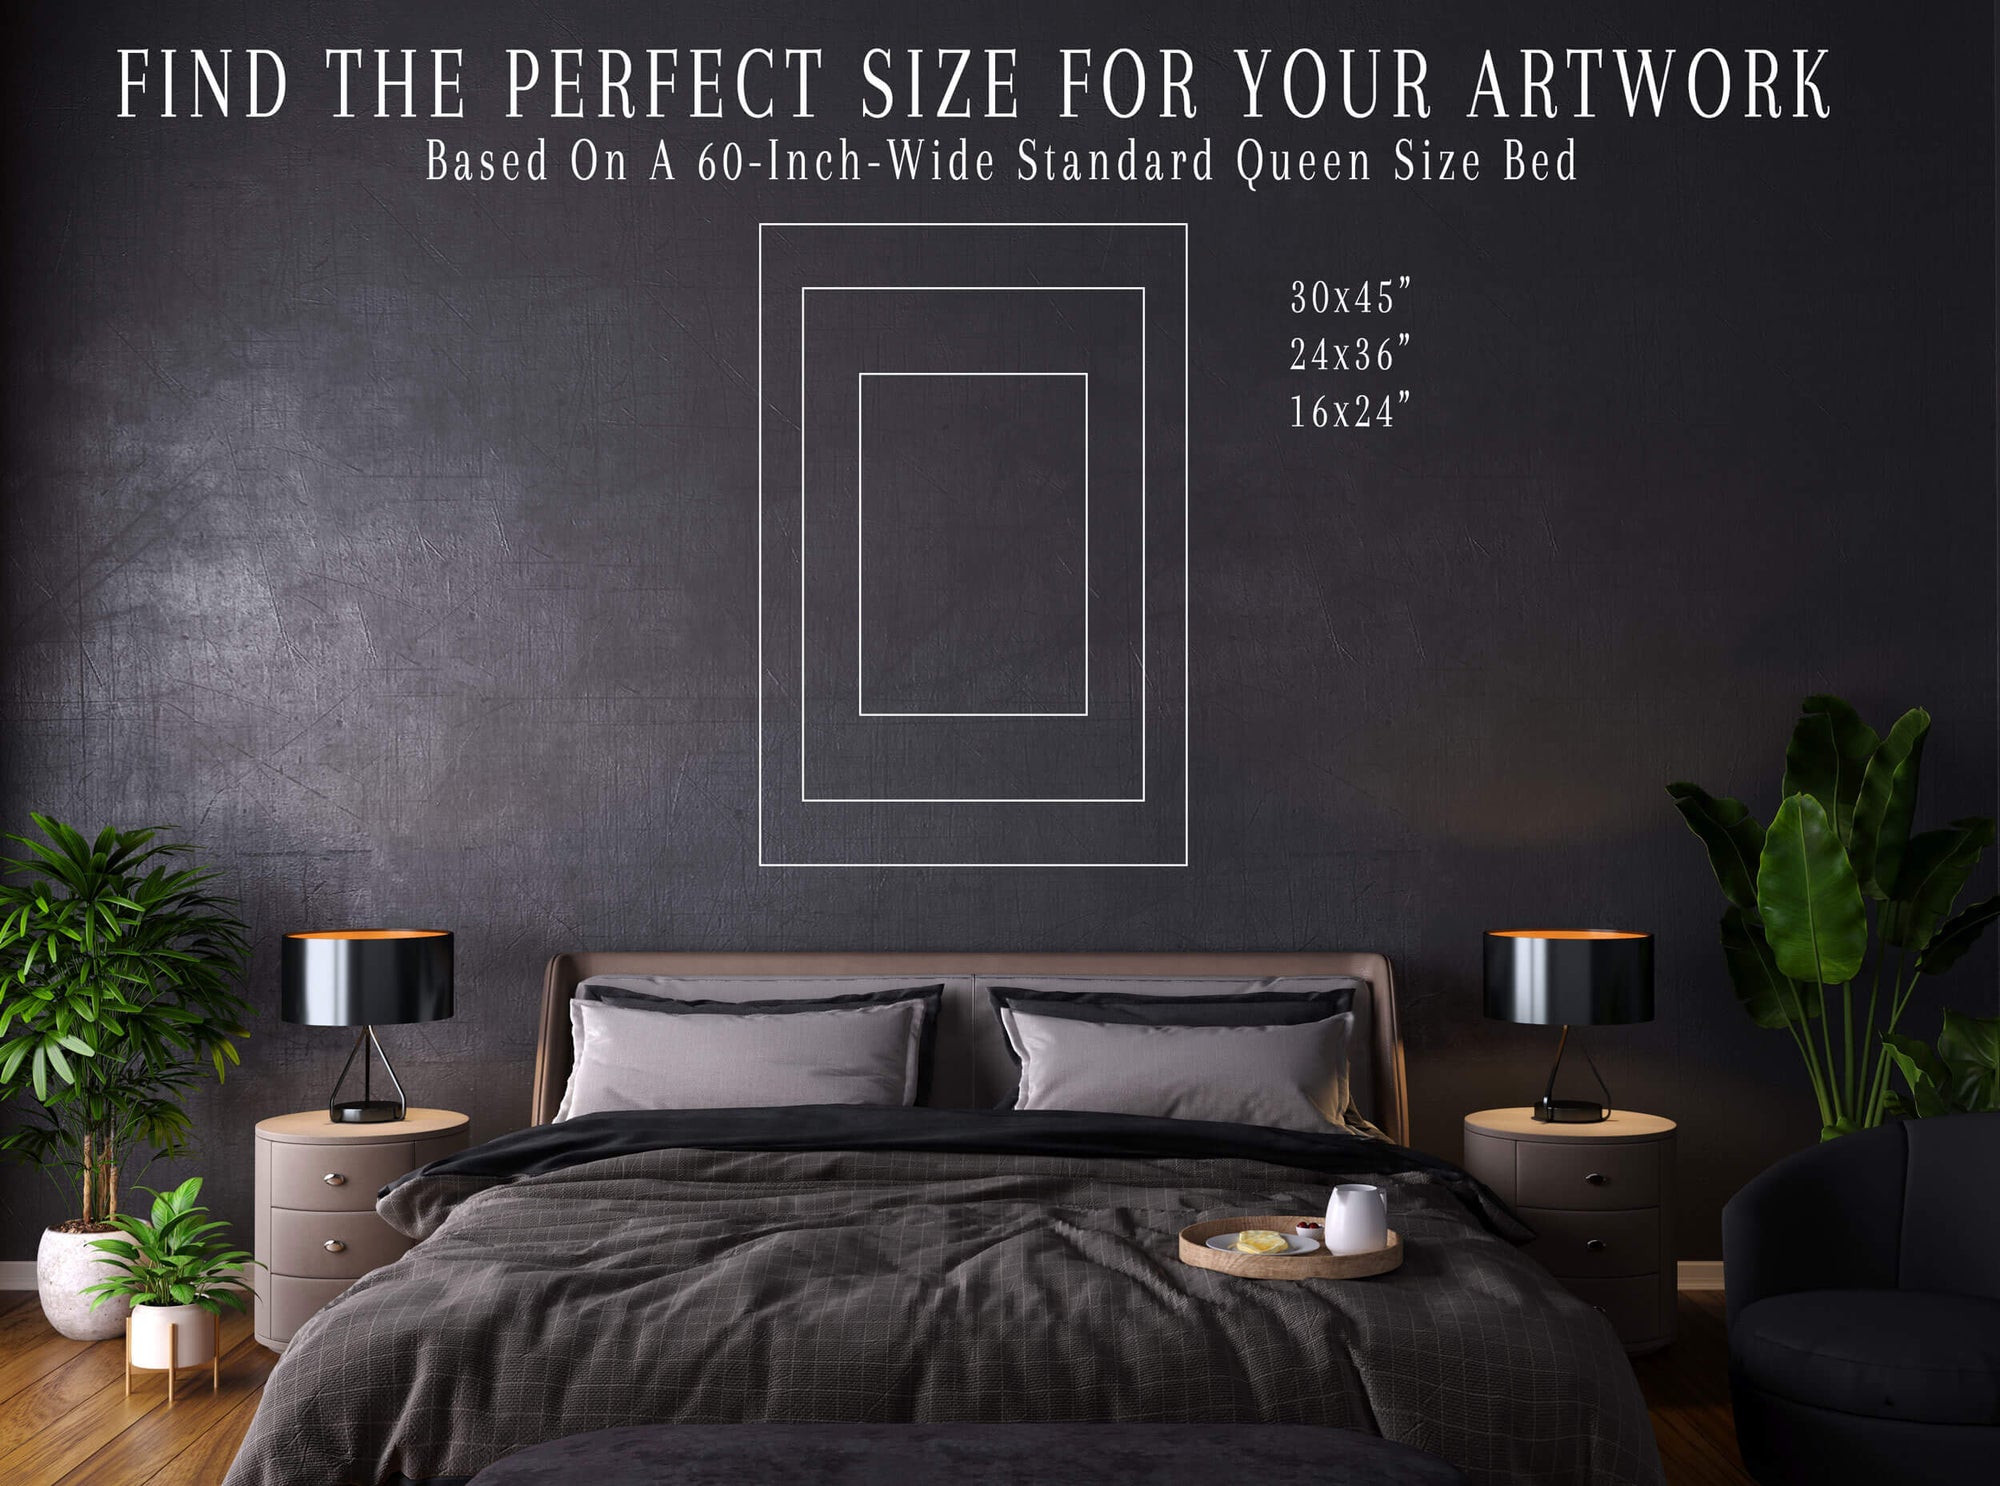 Use this guide to pick the right size art for your space.